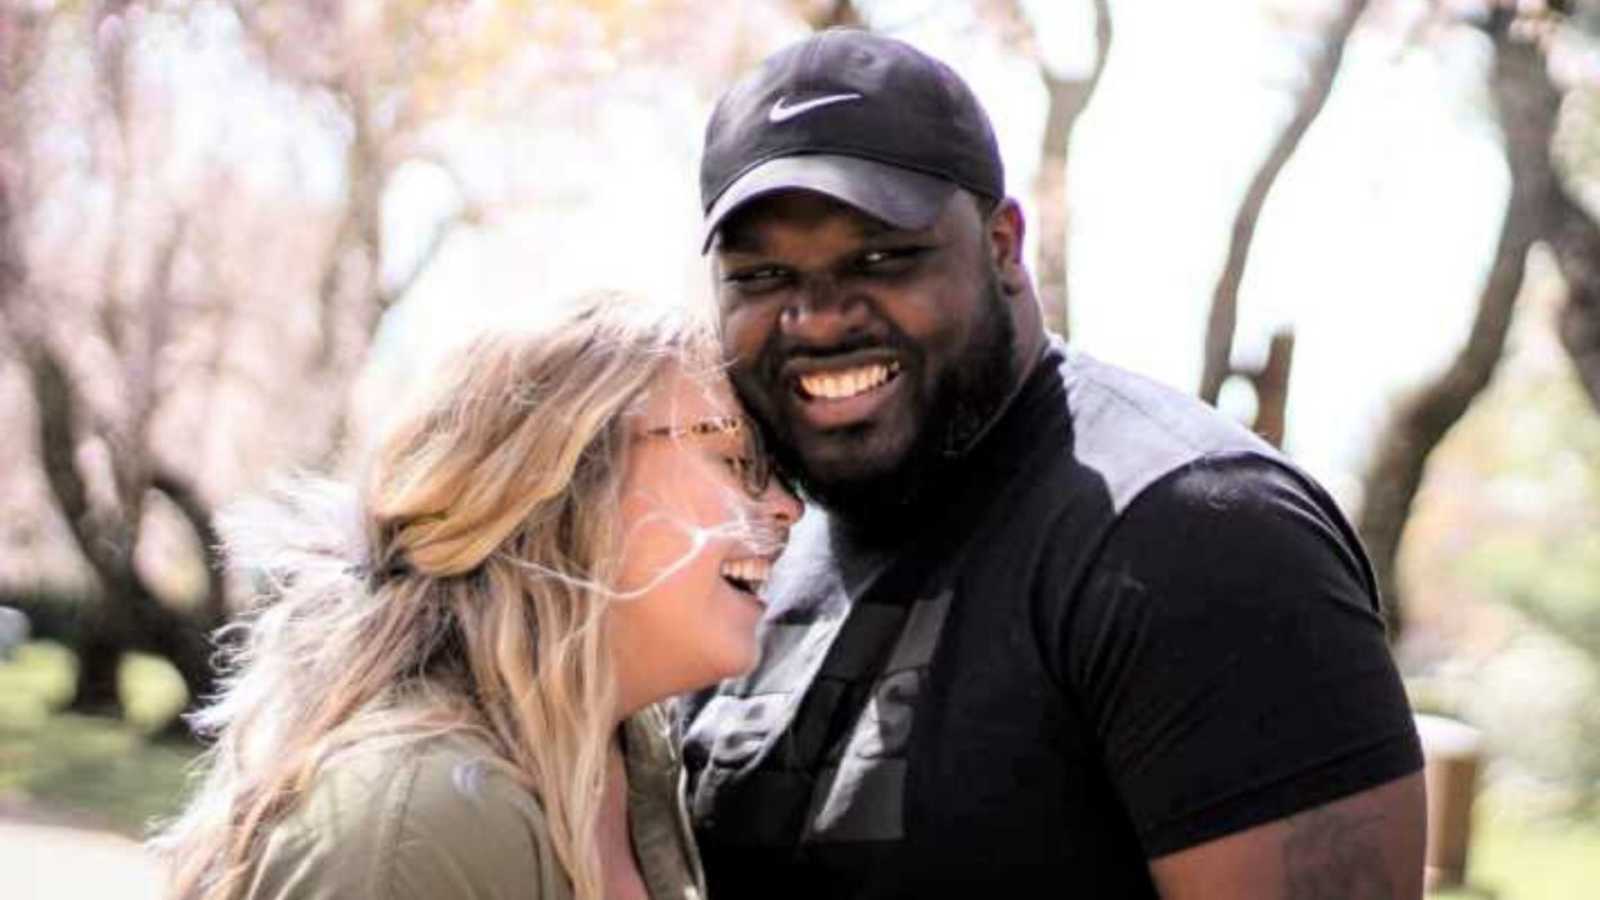 interracial couple smiling in park